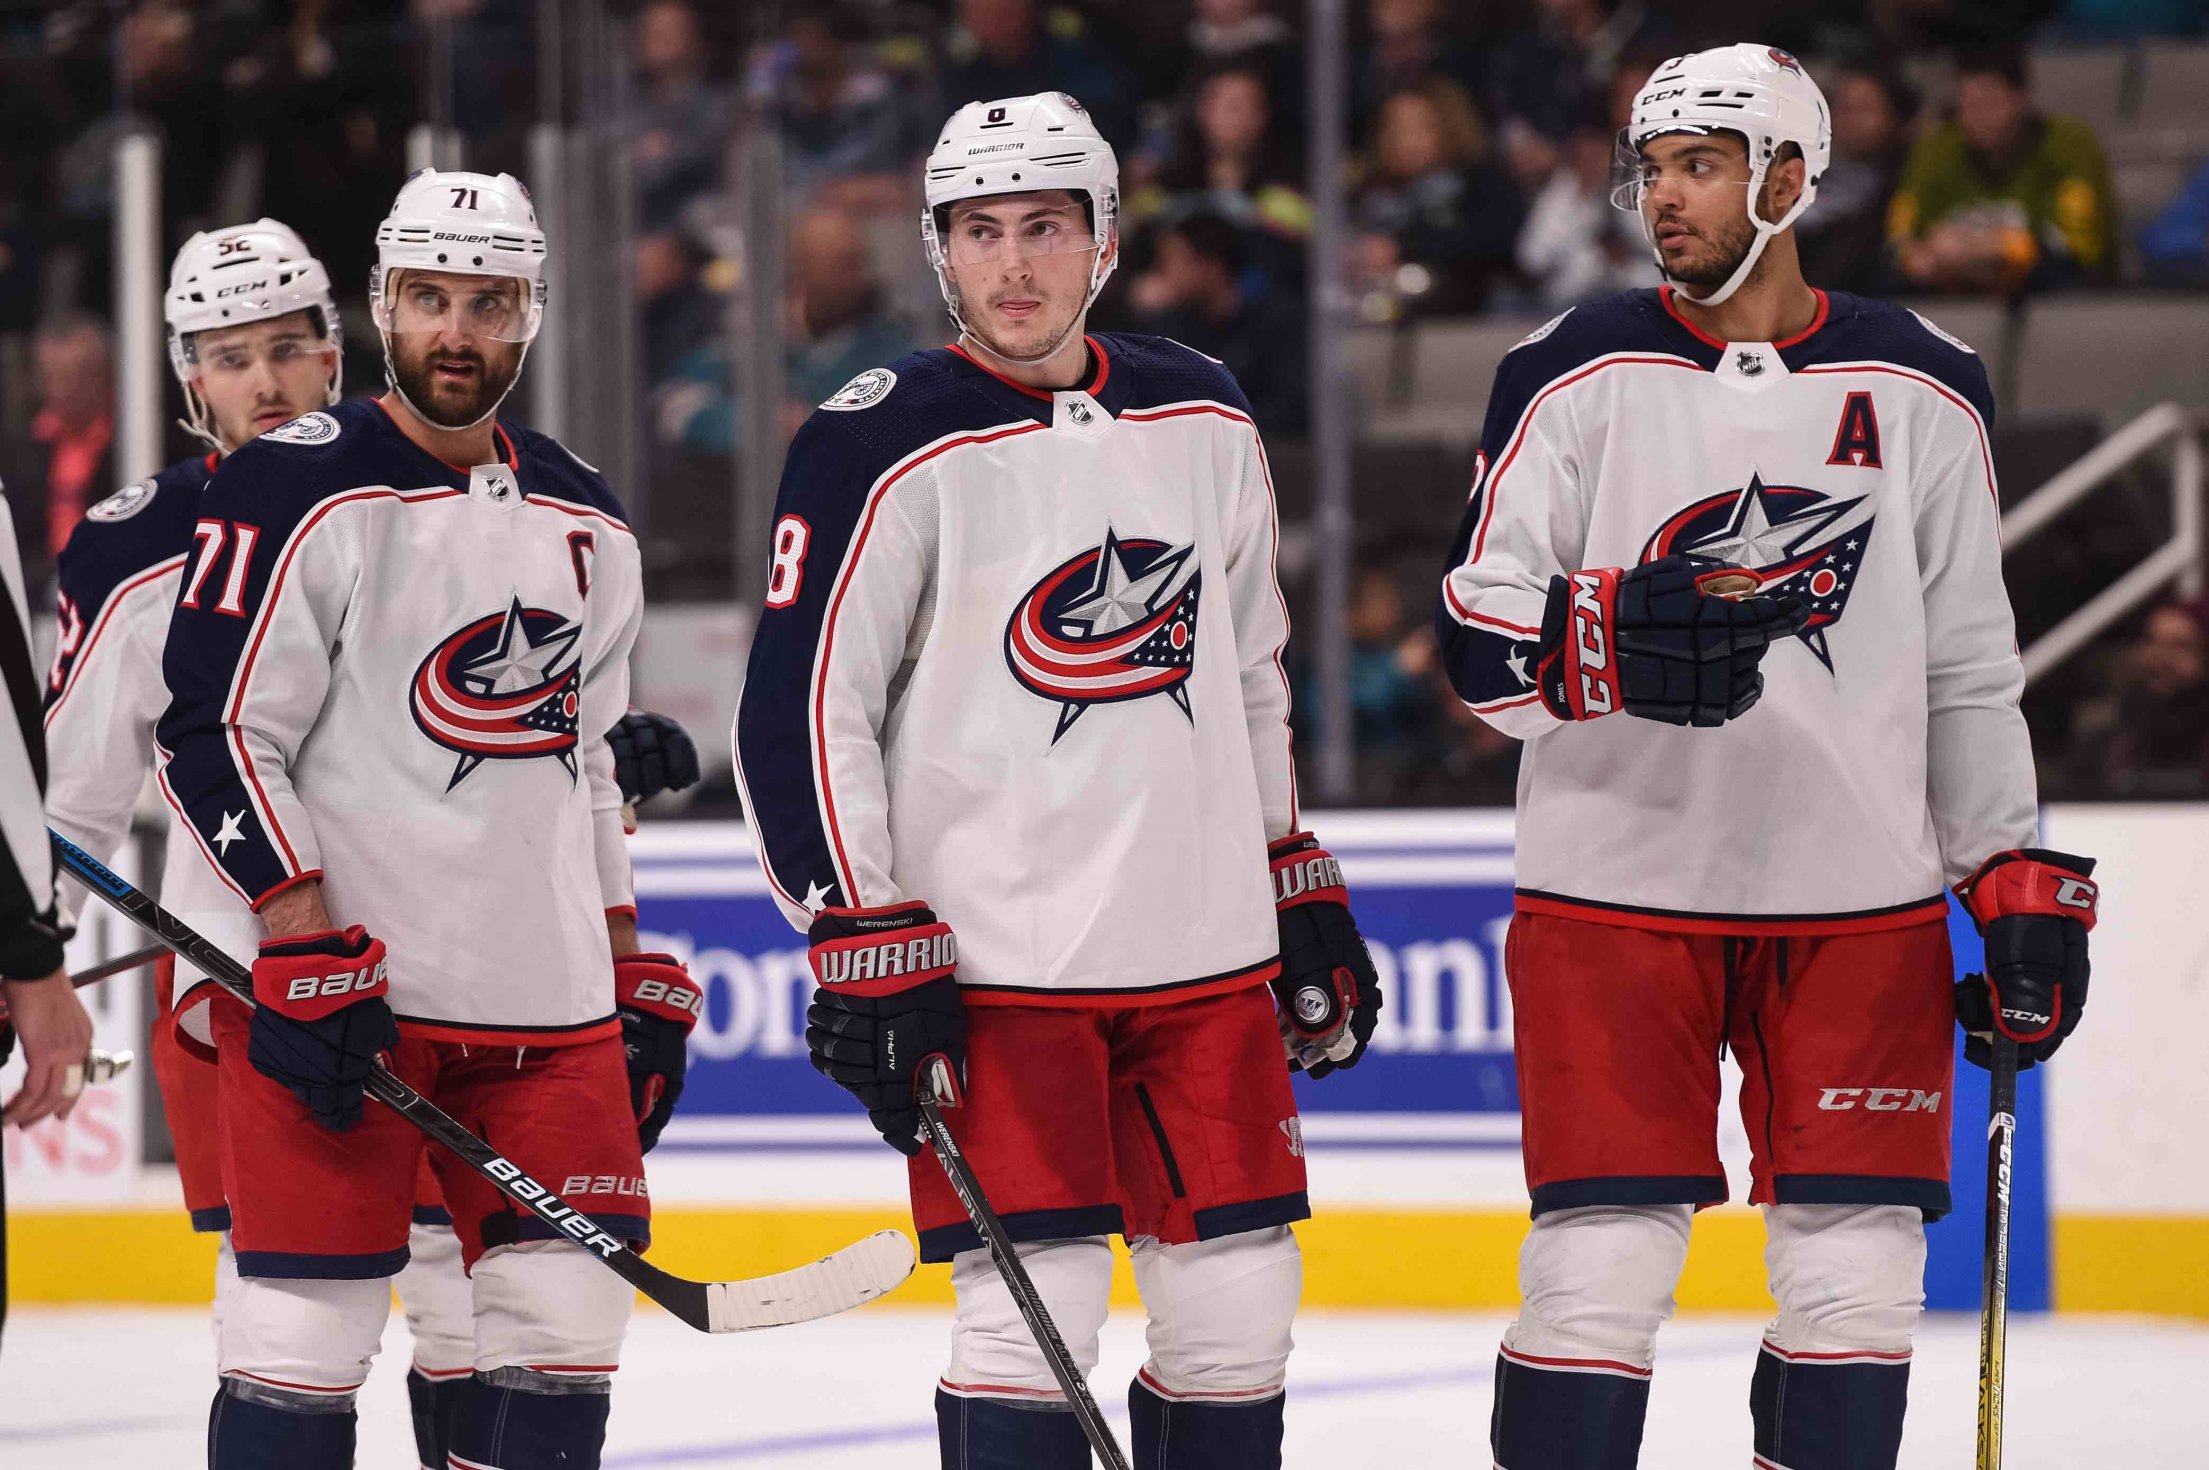 Bandwagoning 101: Everything You Need to Know About the Blue Jackets Roster  to Be the Superfan You Deserve to Be | 1st Ohio Battery